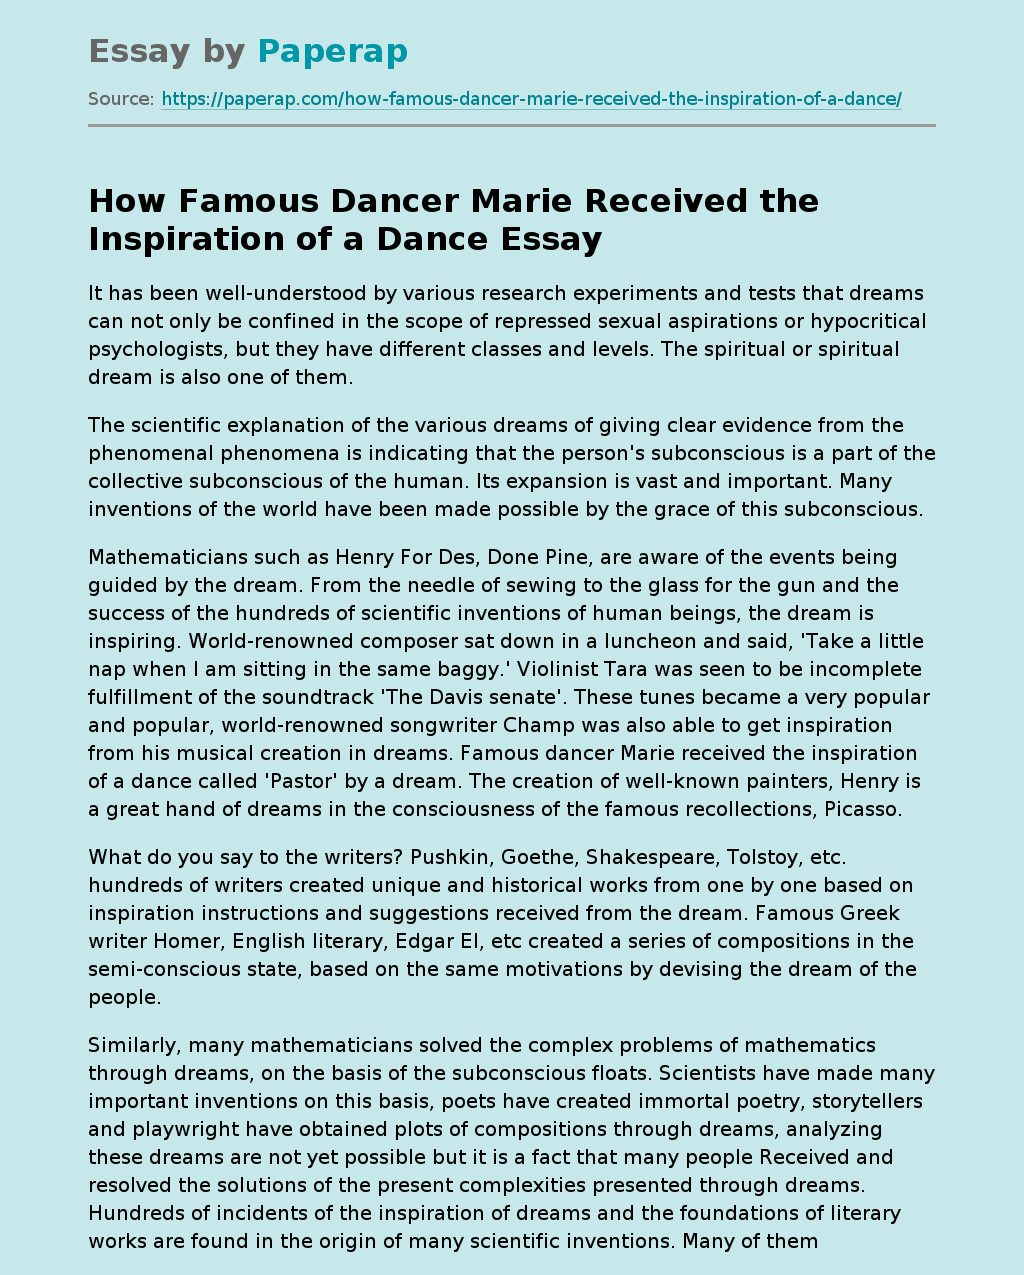 How Famous Dancer Marie Received the Inspiration of a Dance